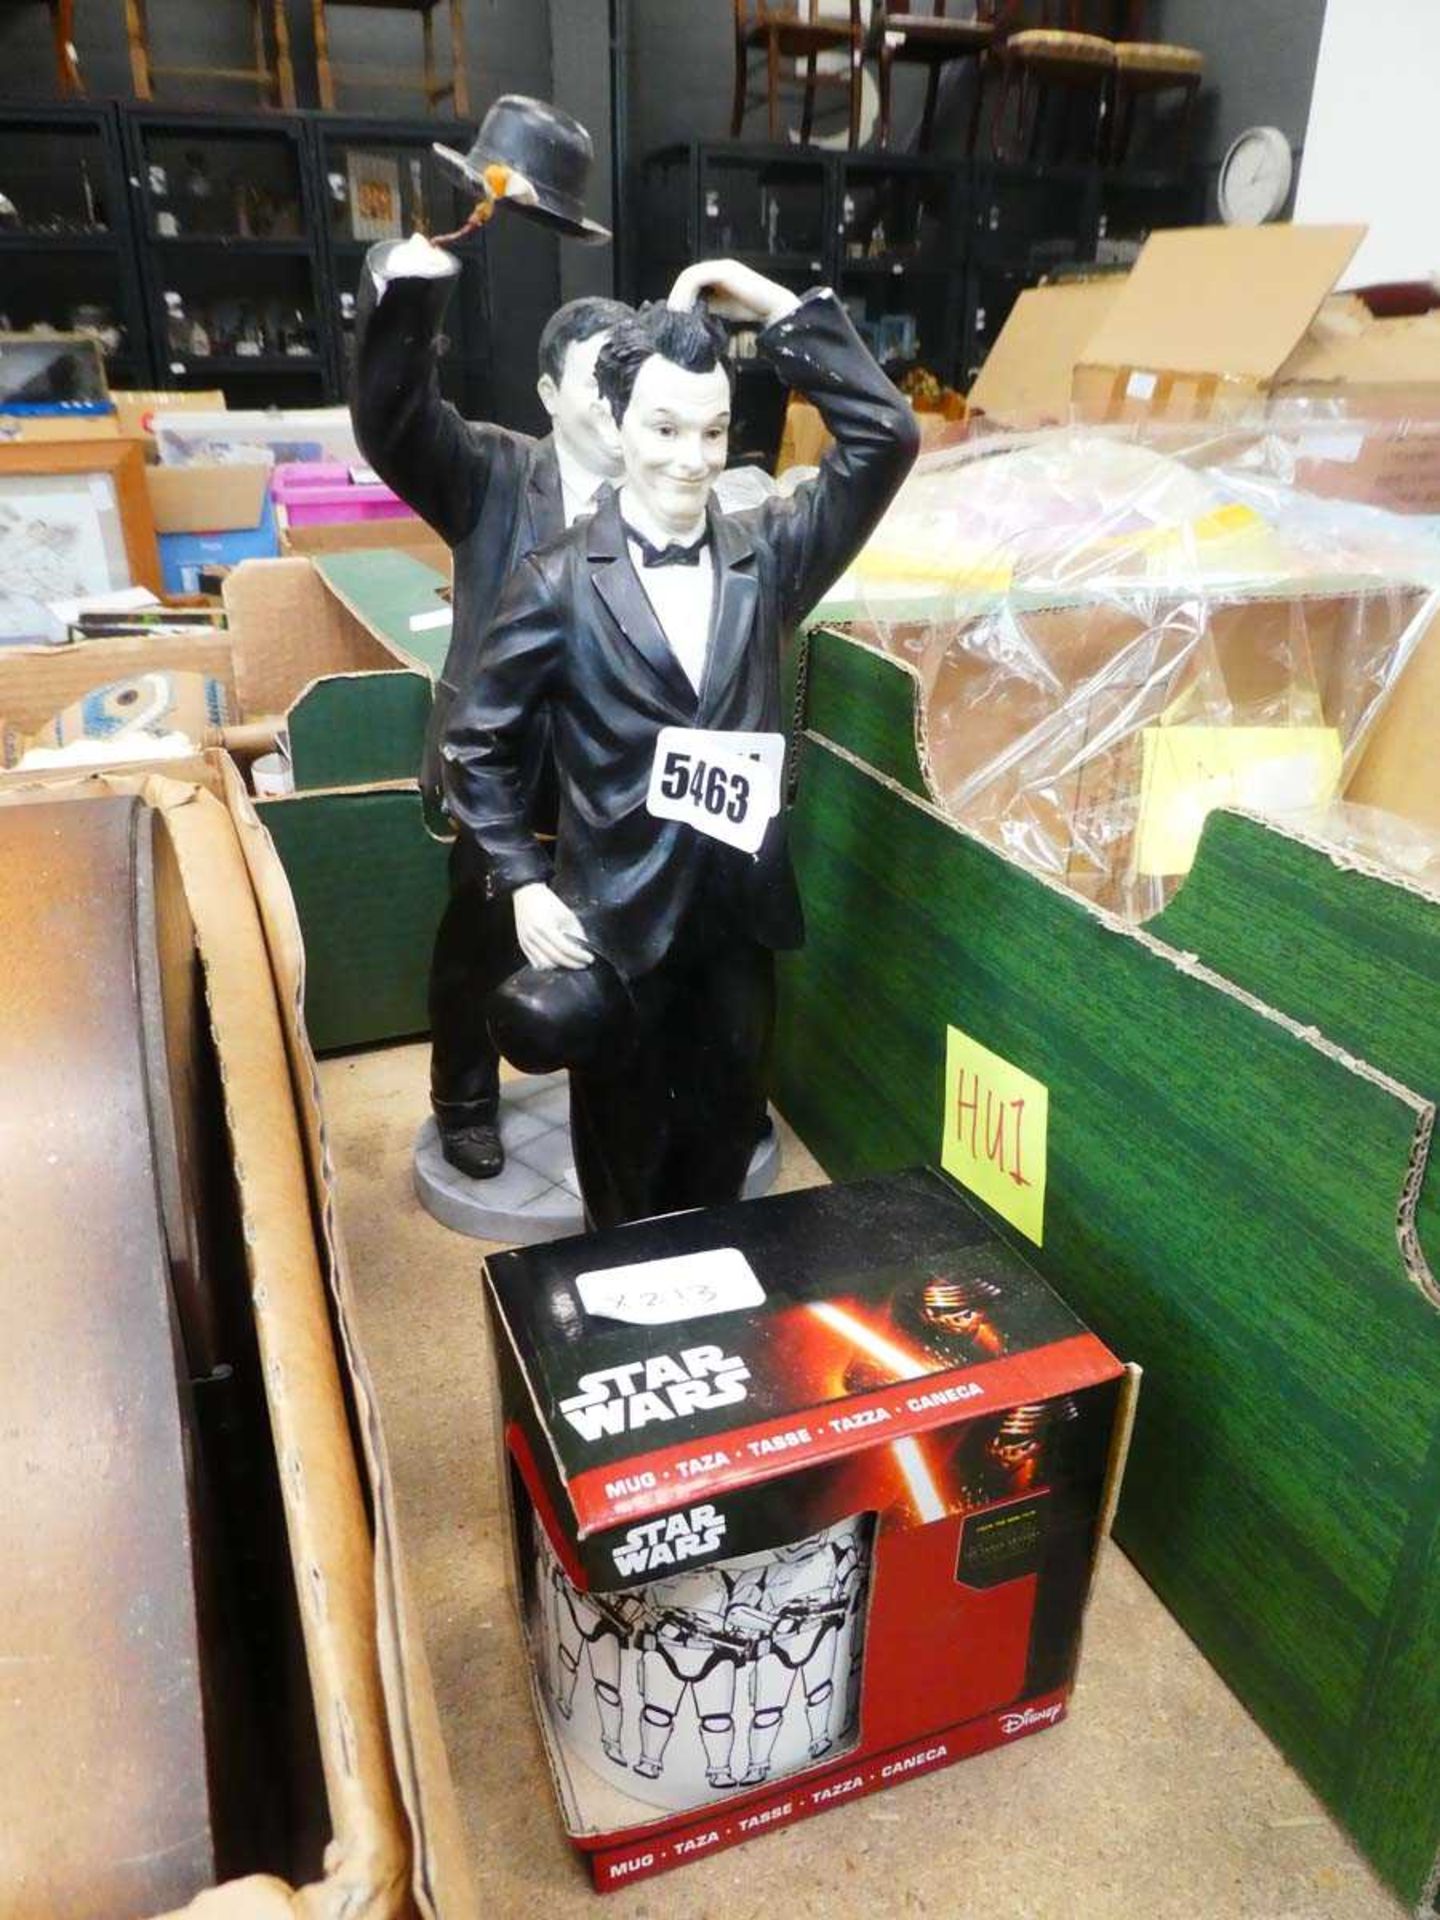 Two resin figures of Laurel and Hardy and a Star Wars mug